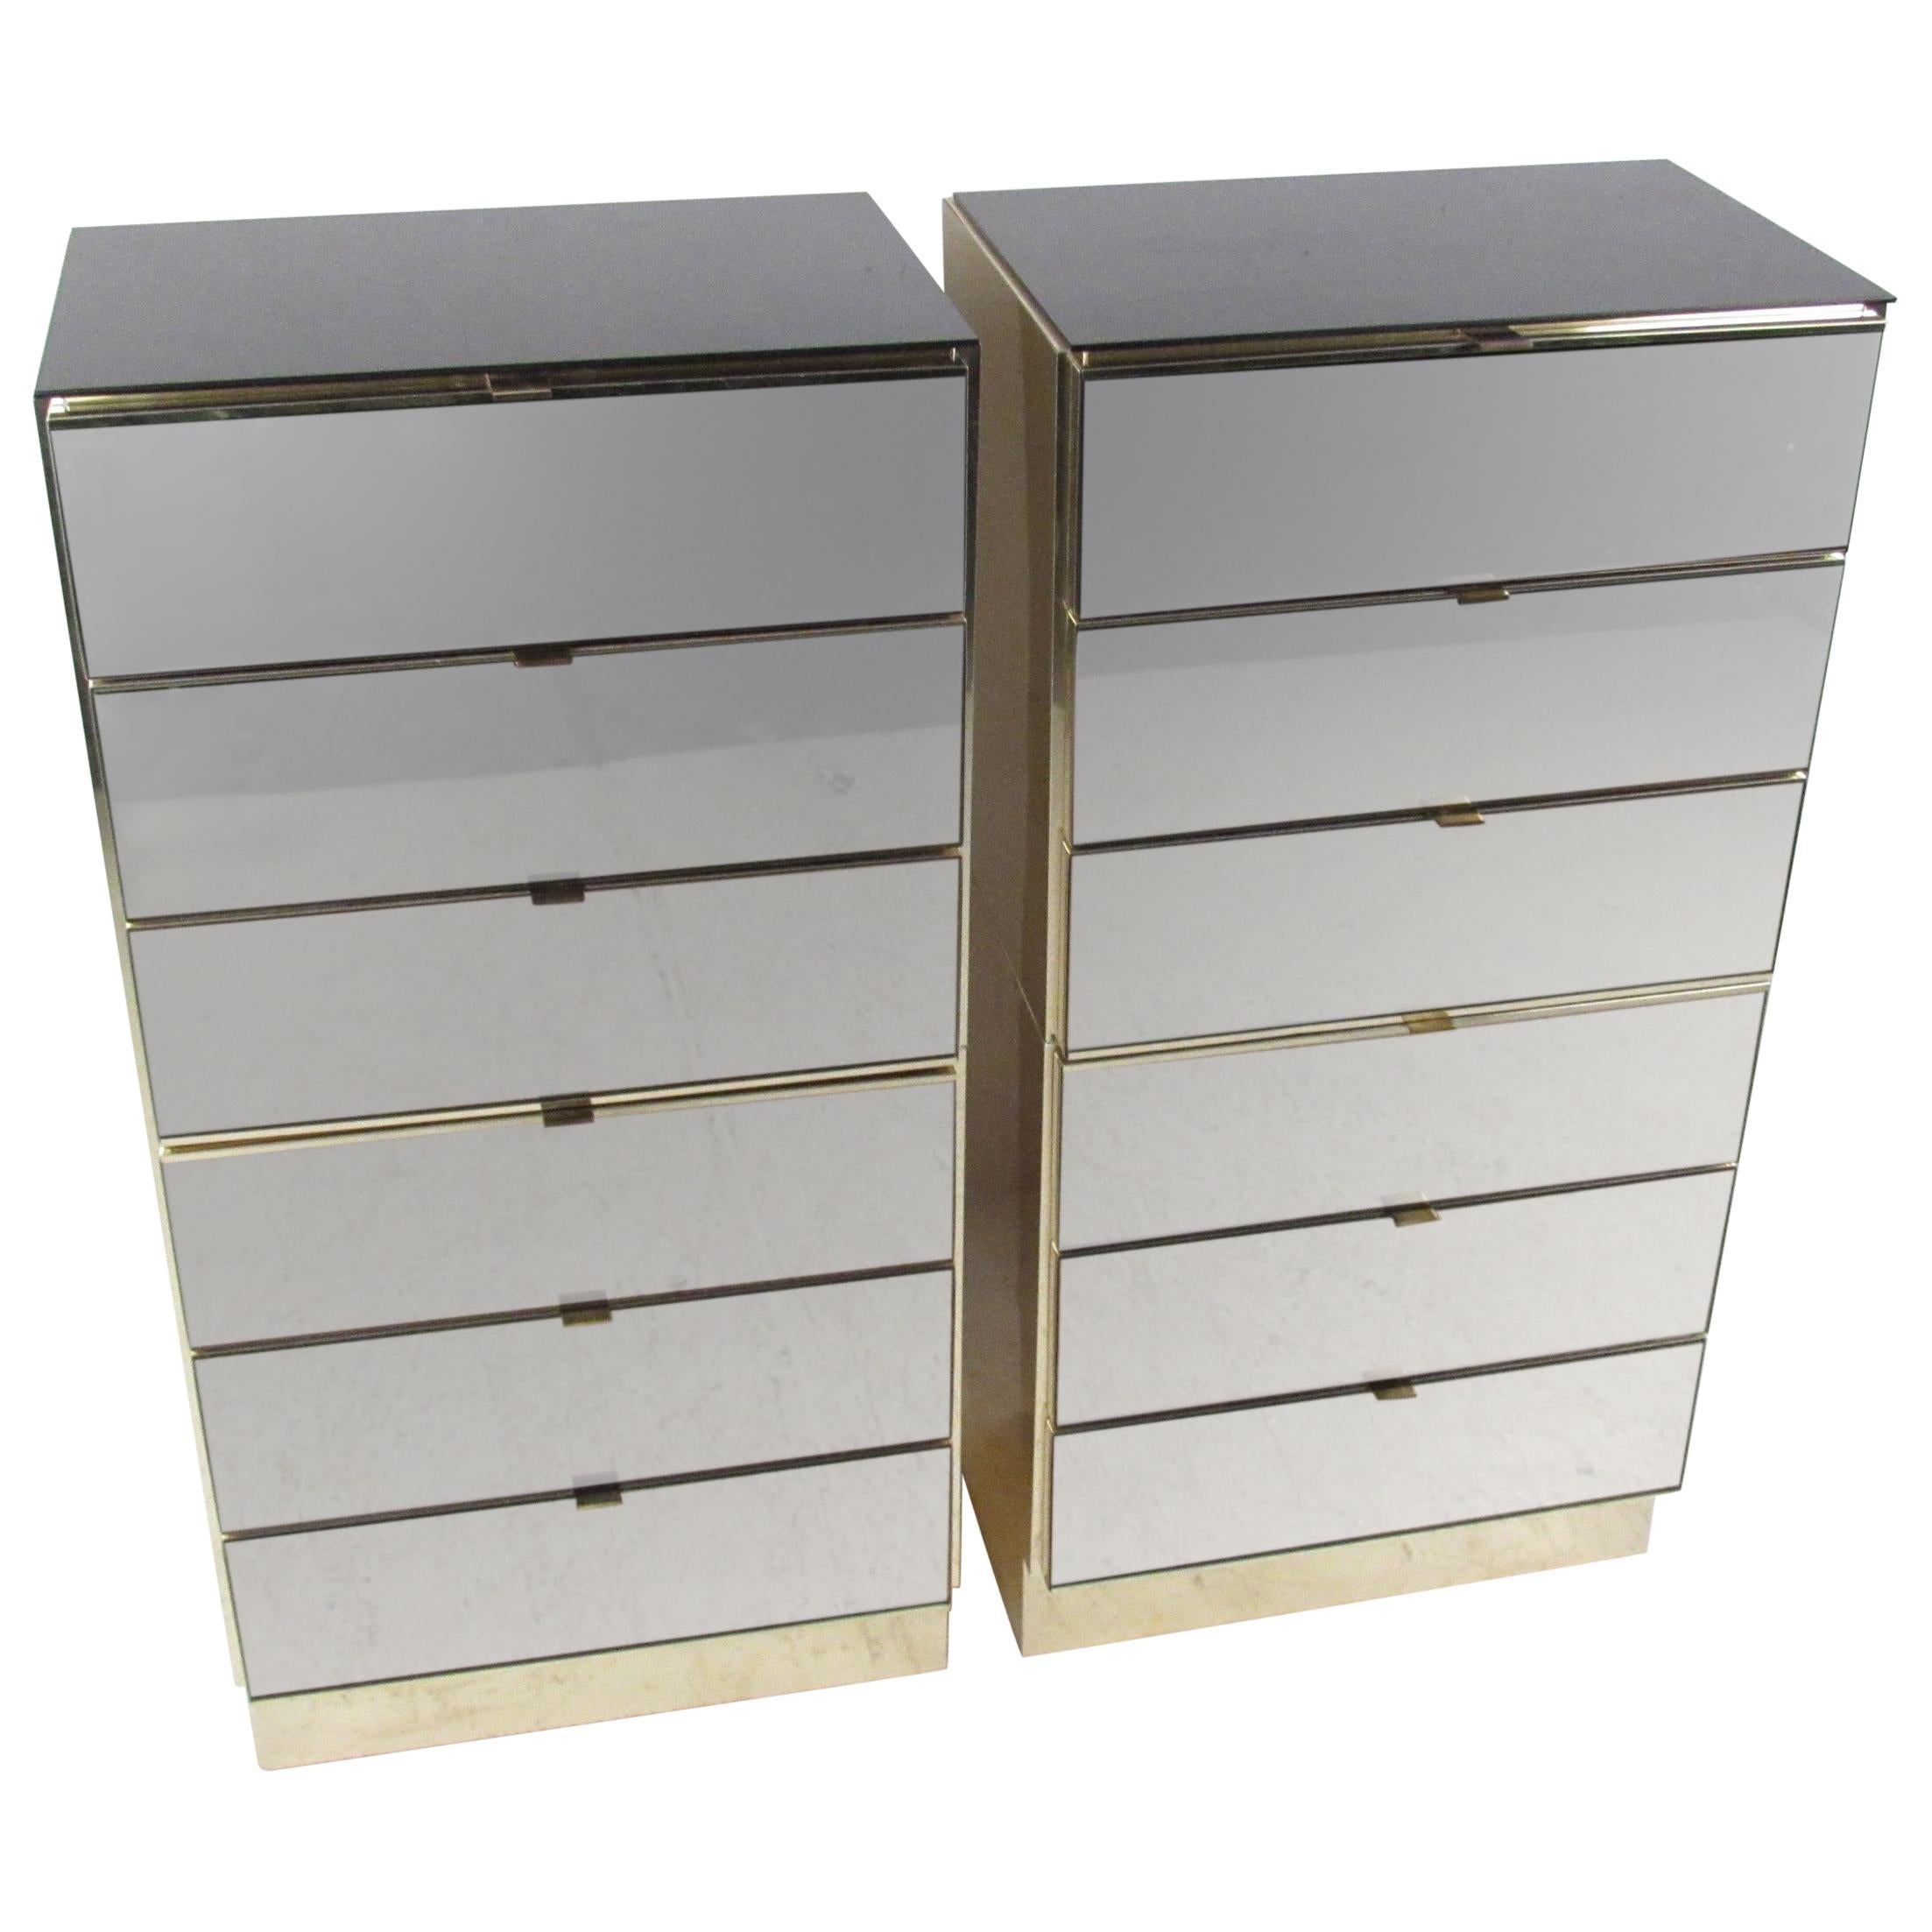 Pair of Ello Mirrored Lingerie Chests